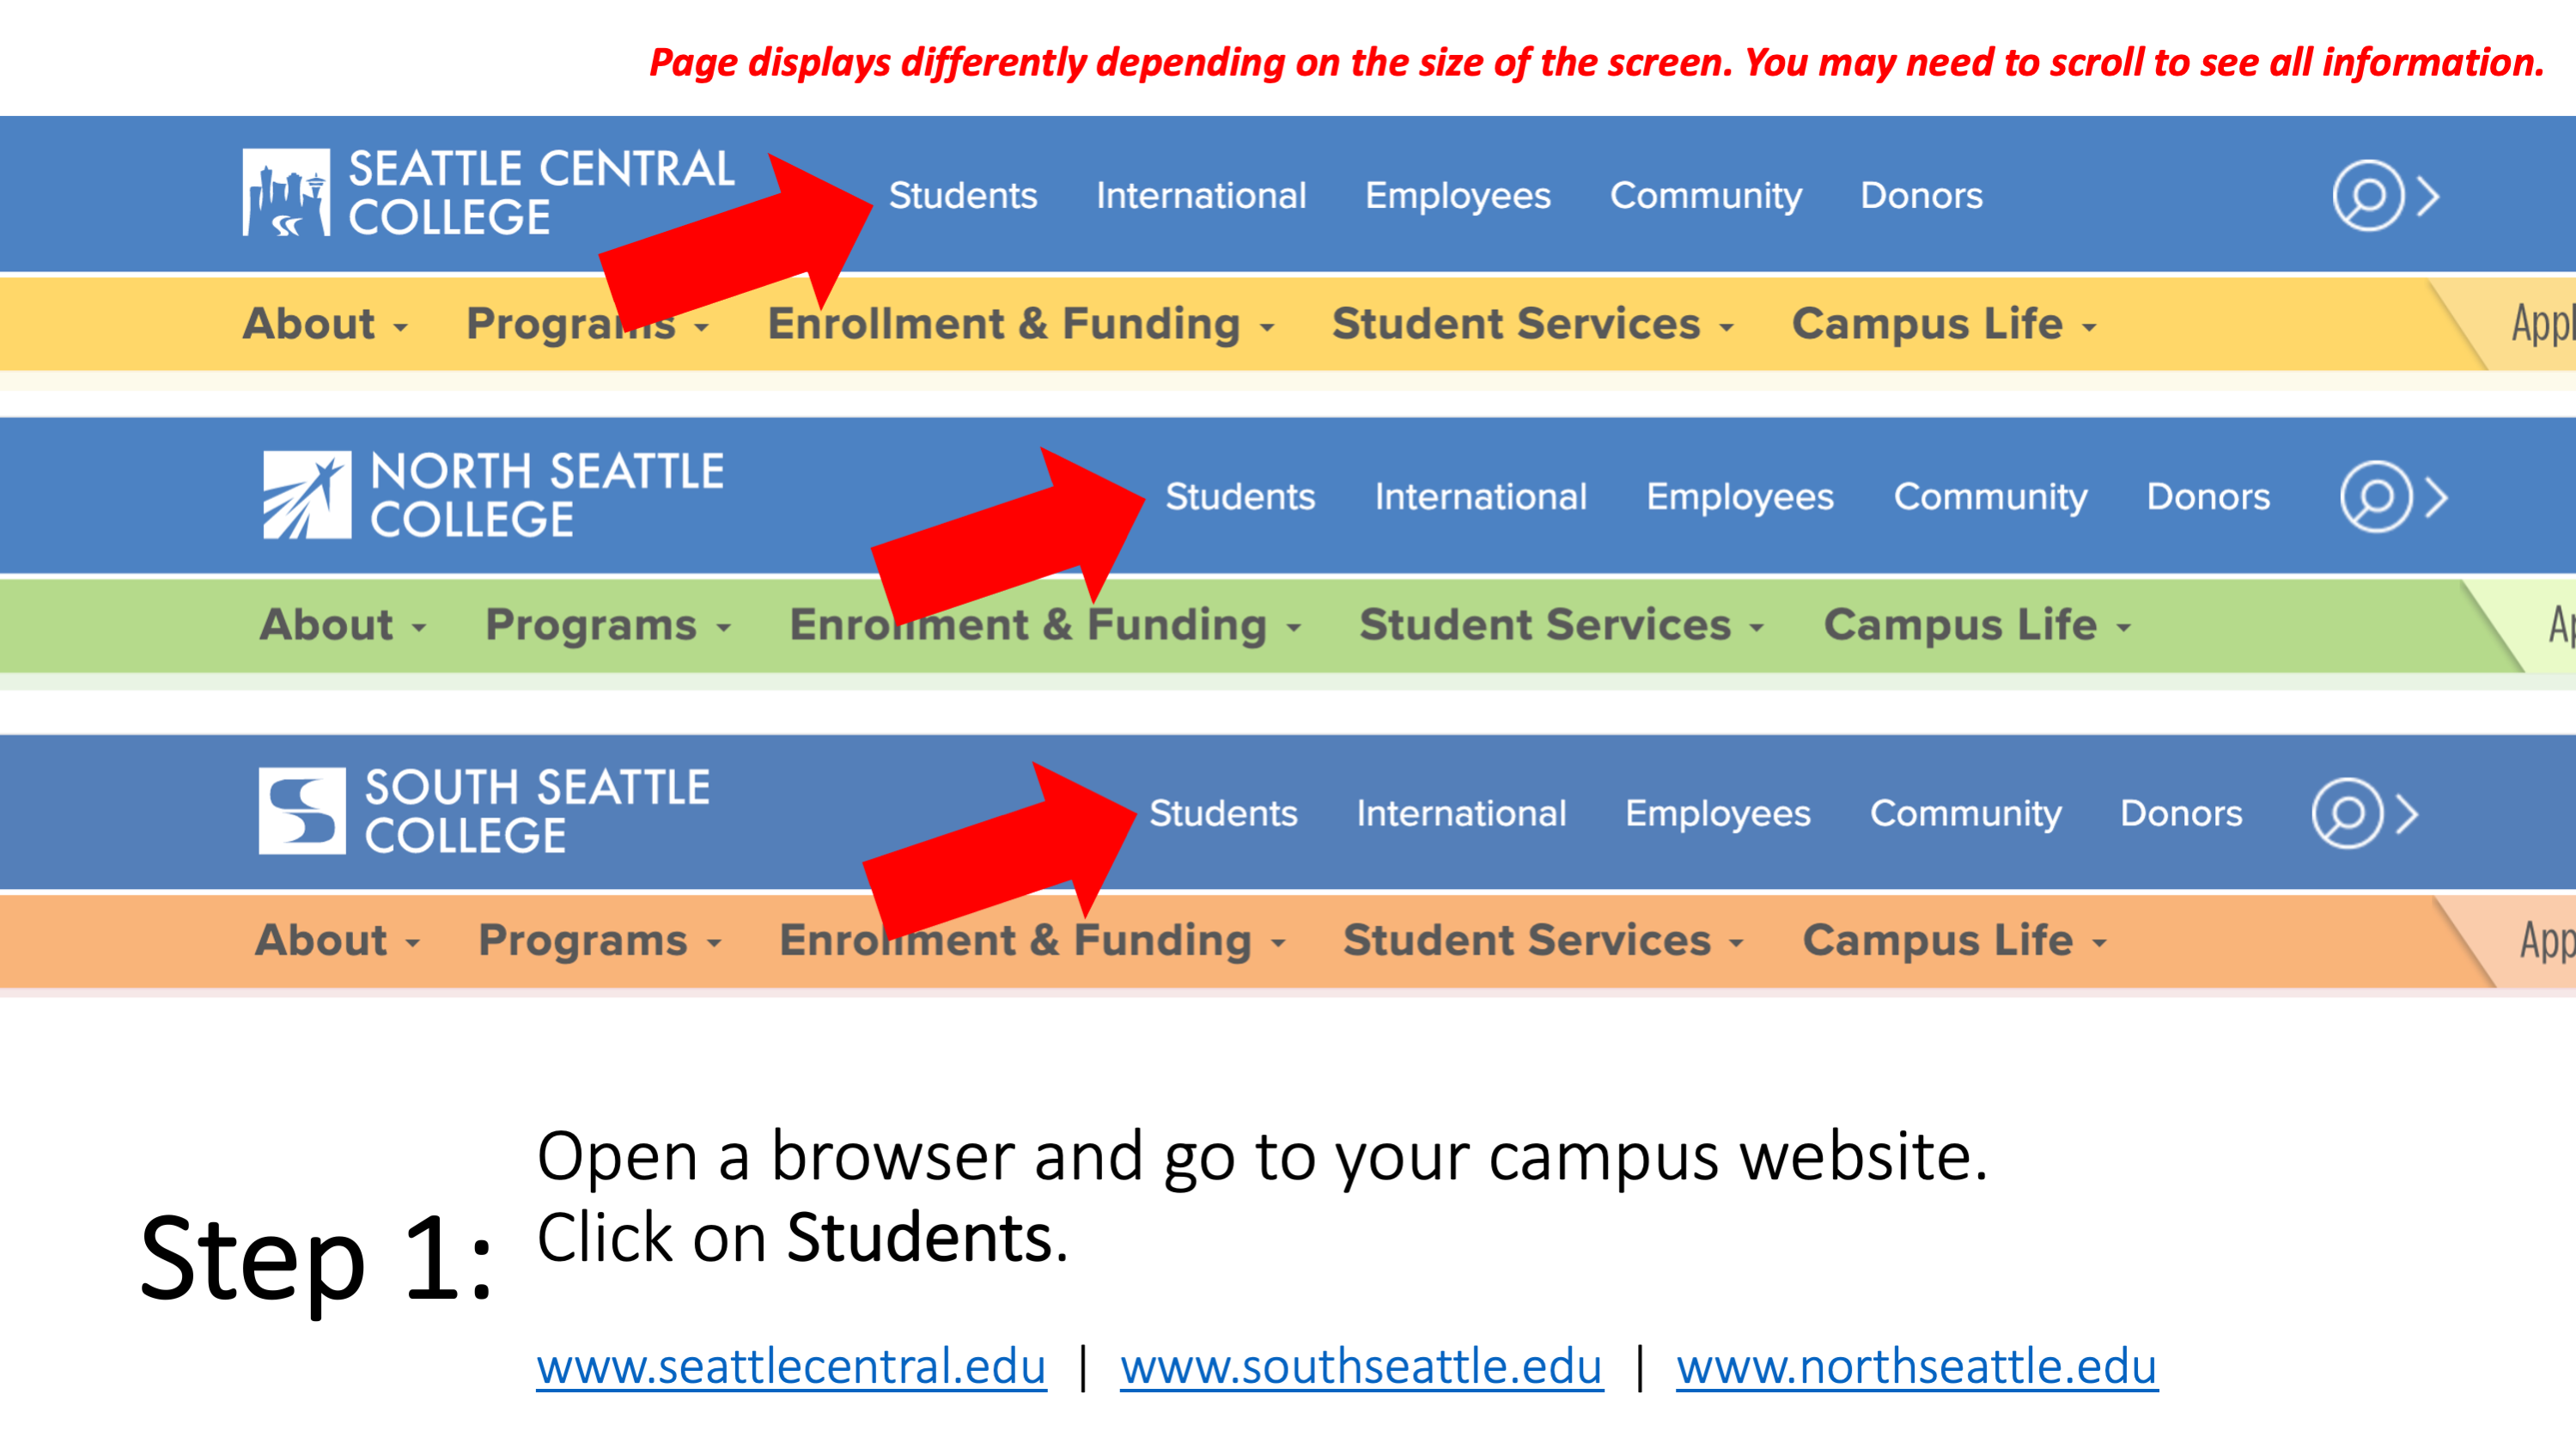 Step 1: Open a browser and go to your campus website.  Click on Students. www.seattlecentral.edu , www.southseattle.edu , or www.northseattle.edu. Page displays differently depending on the size of the screen. You may need to scroll to see all information.